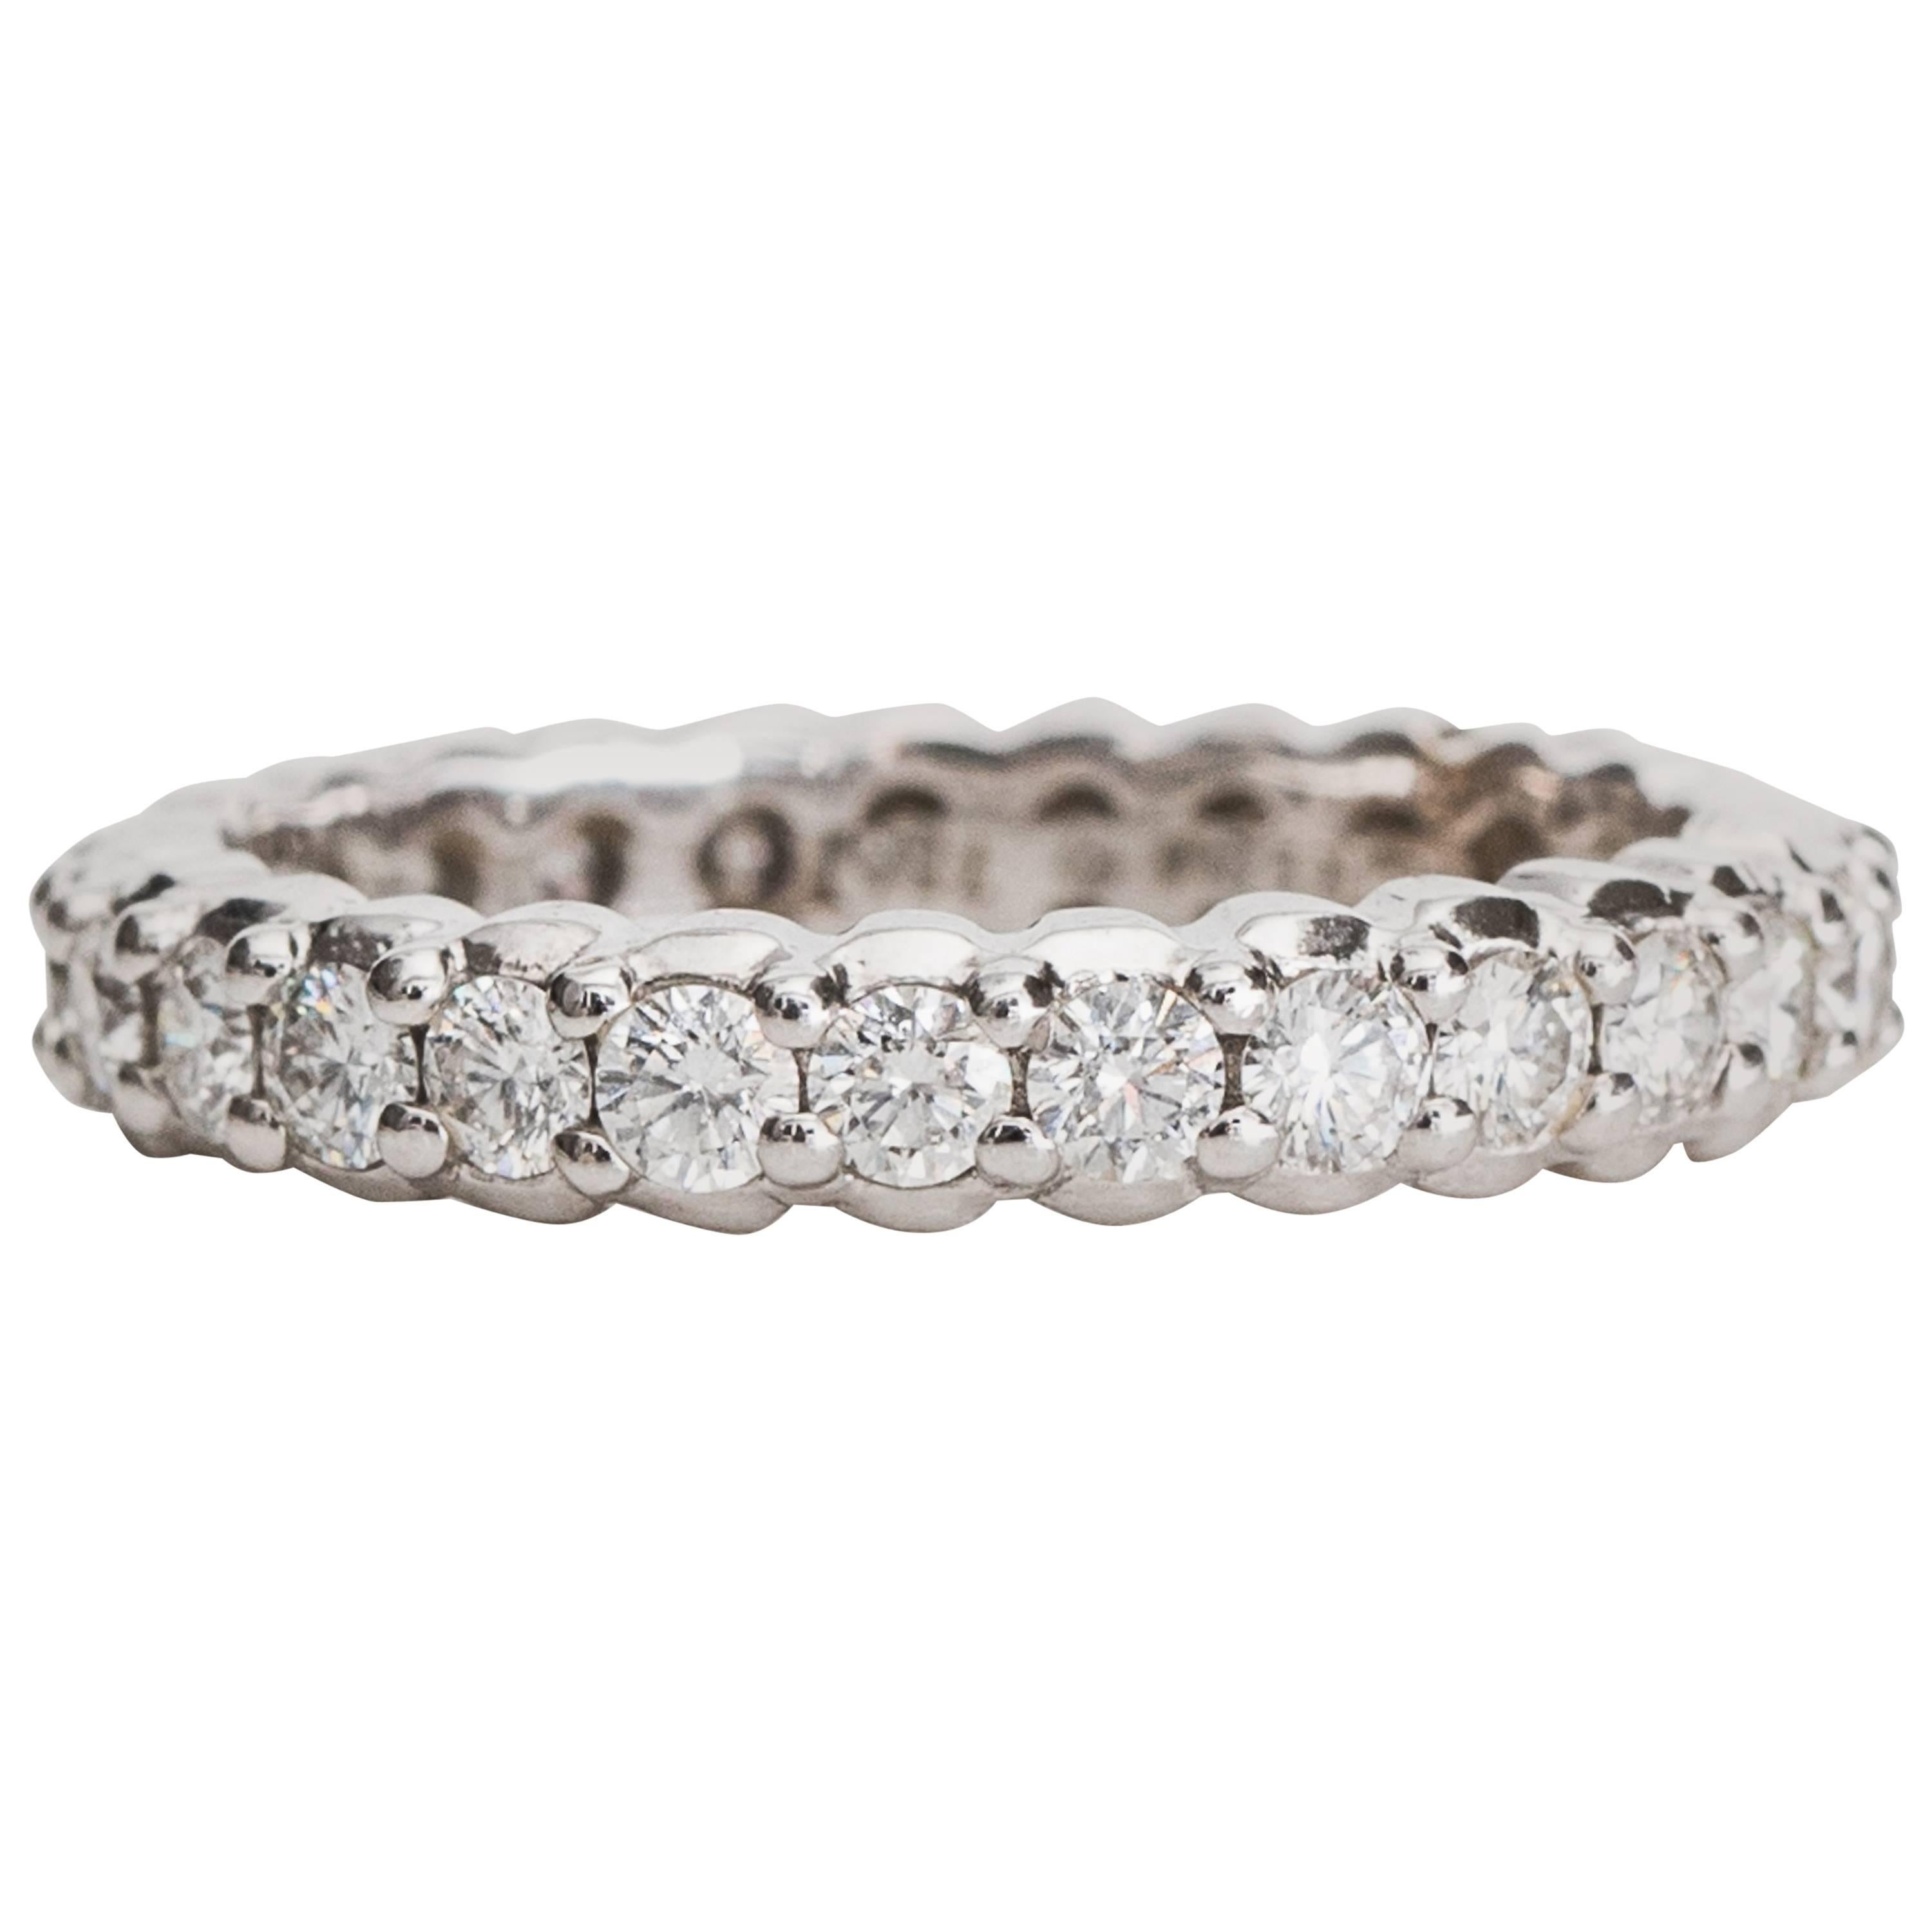 Paul Morelli 1.5 carat total Diamond and 18K White Gold Eternity Band